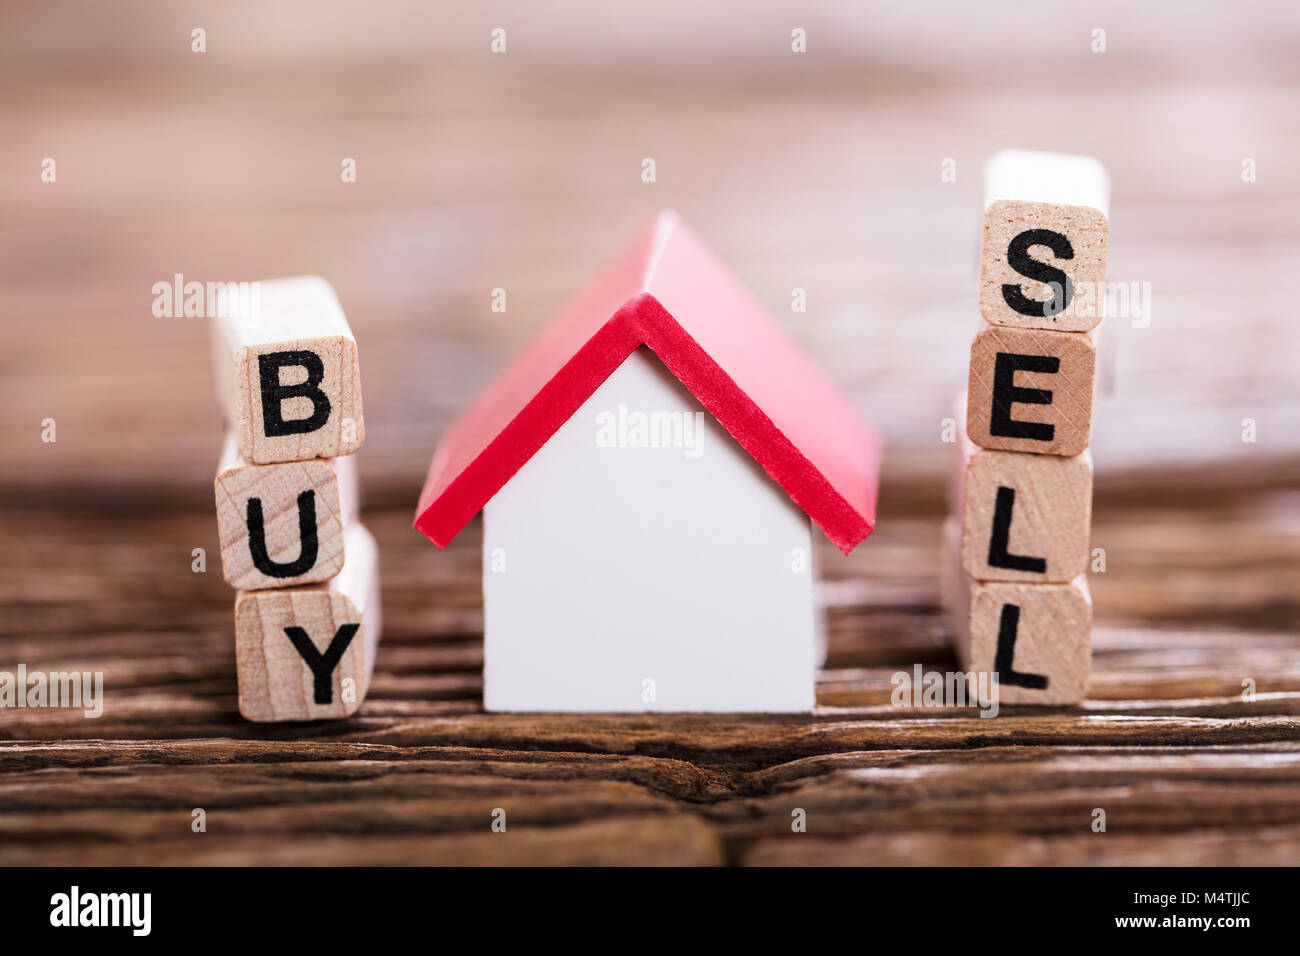 Close-up Of Buy Or Sell Option On Wooden Block With Small House Model Stock Photo